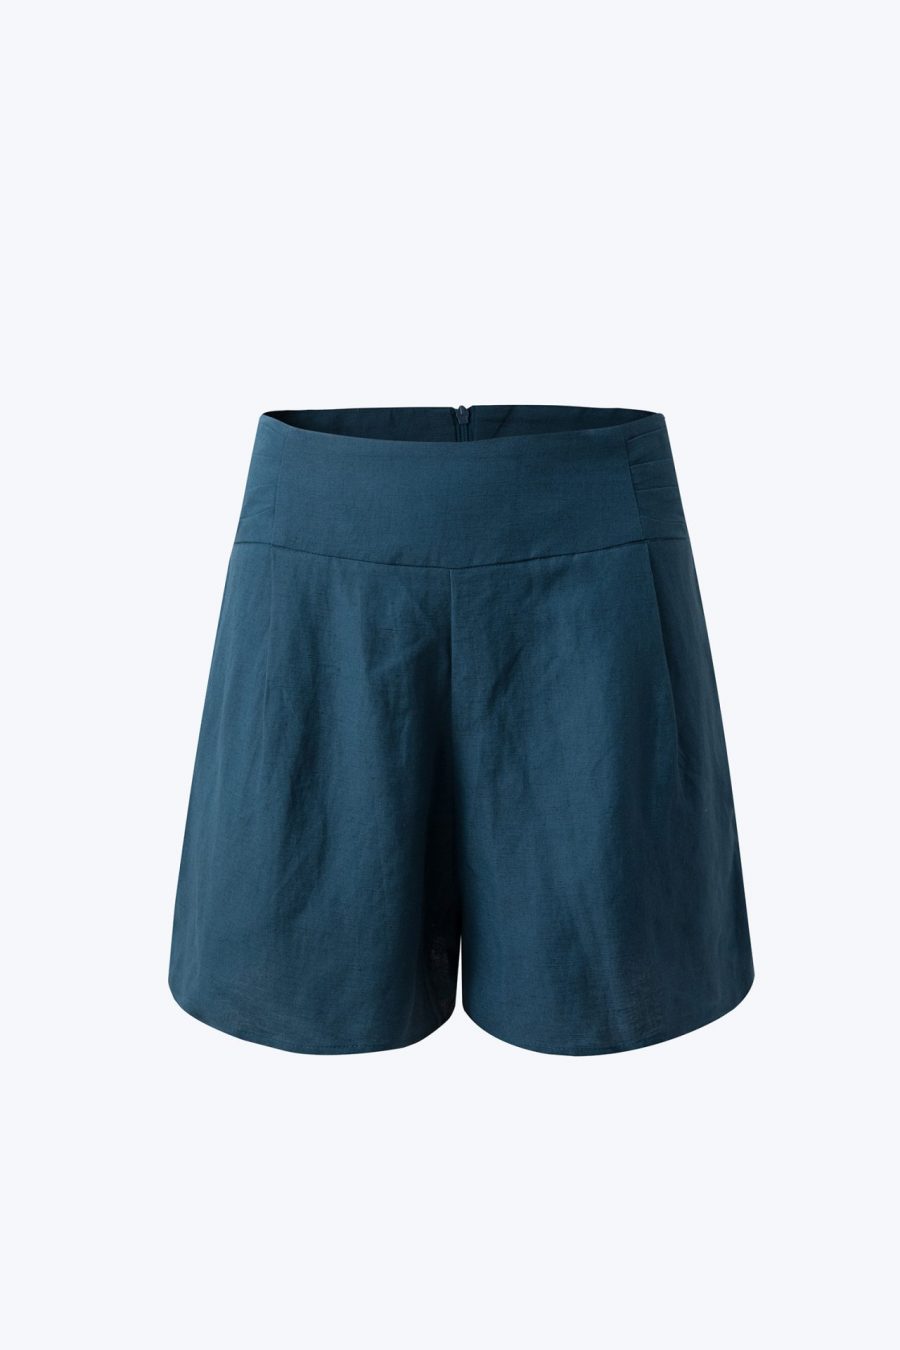 CPS001090W SIDE PLEAT SHORTS DARK TEAL